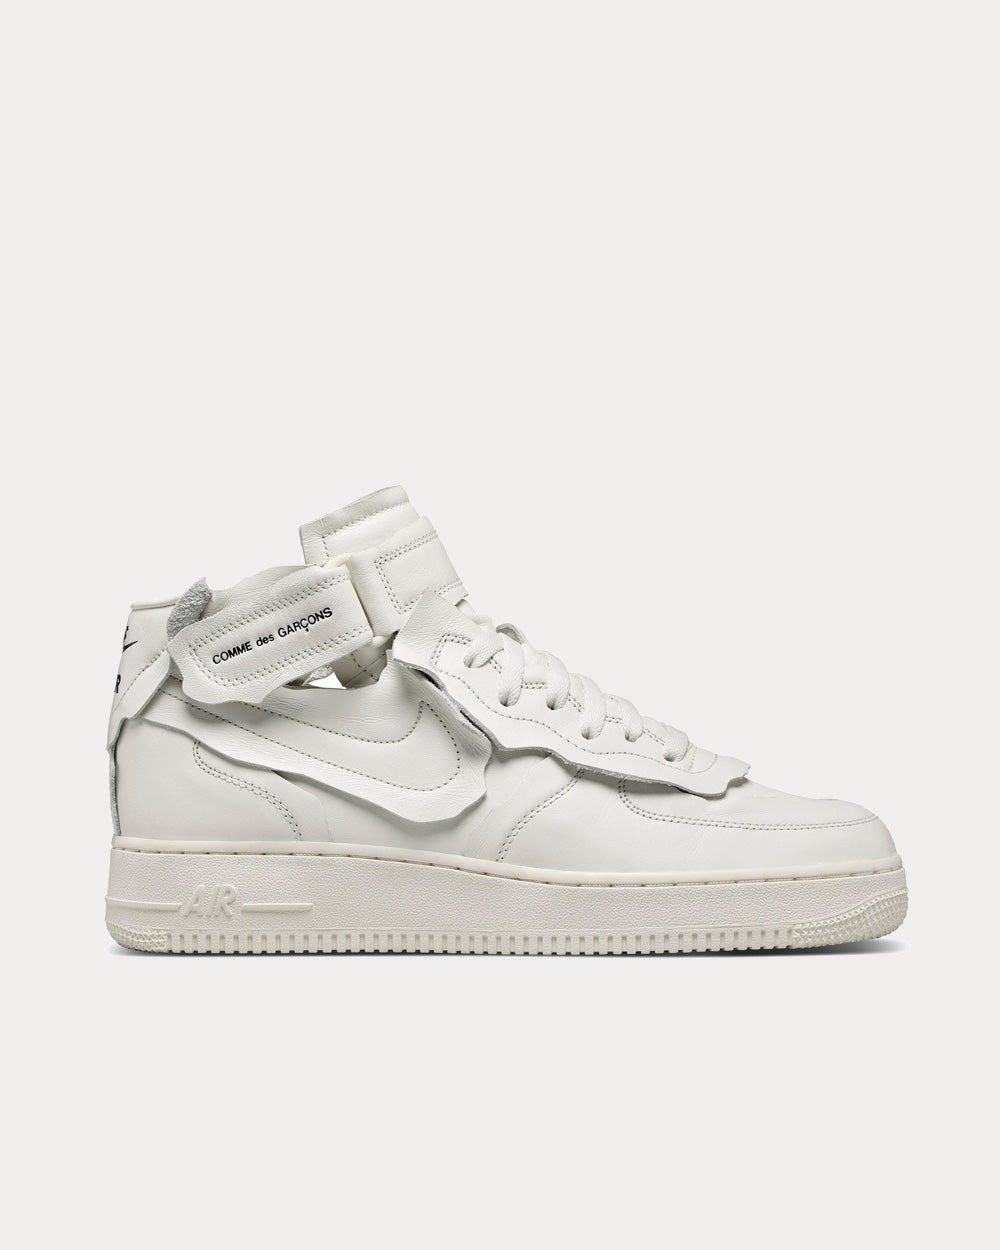 Nike x Comme des Garçons Air Force 1 Mid White High Top Sneakers ...